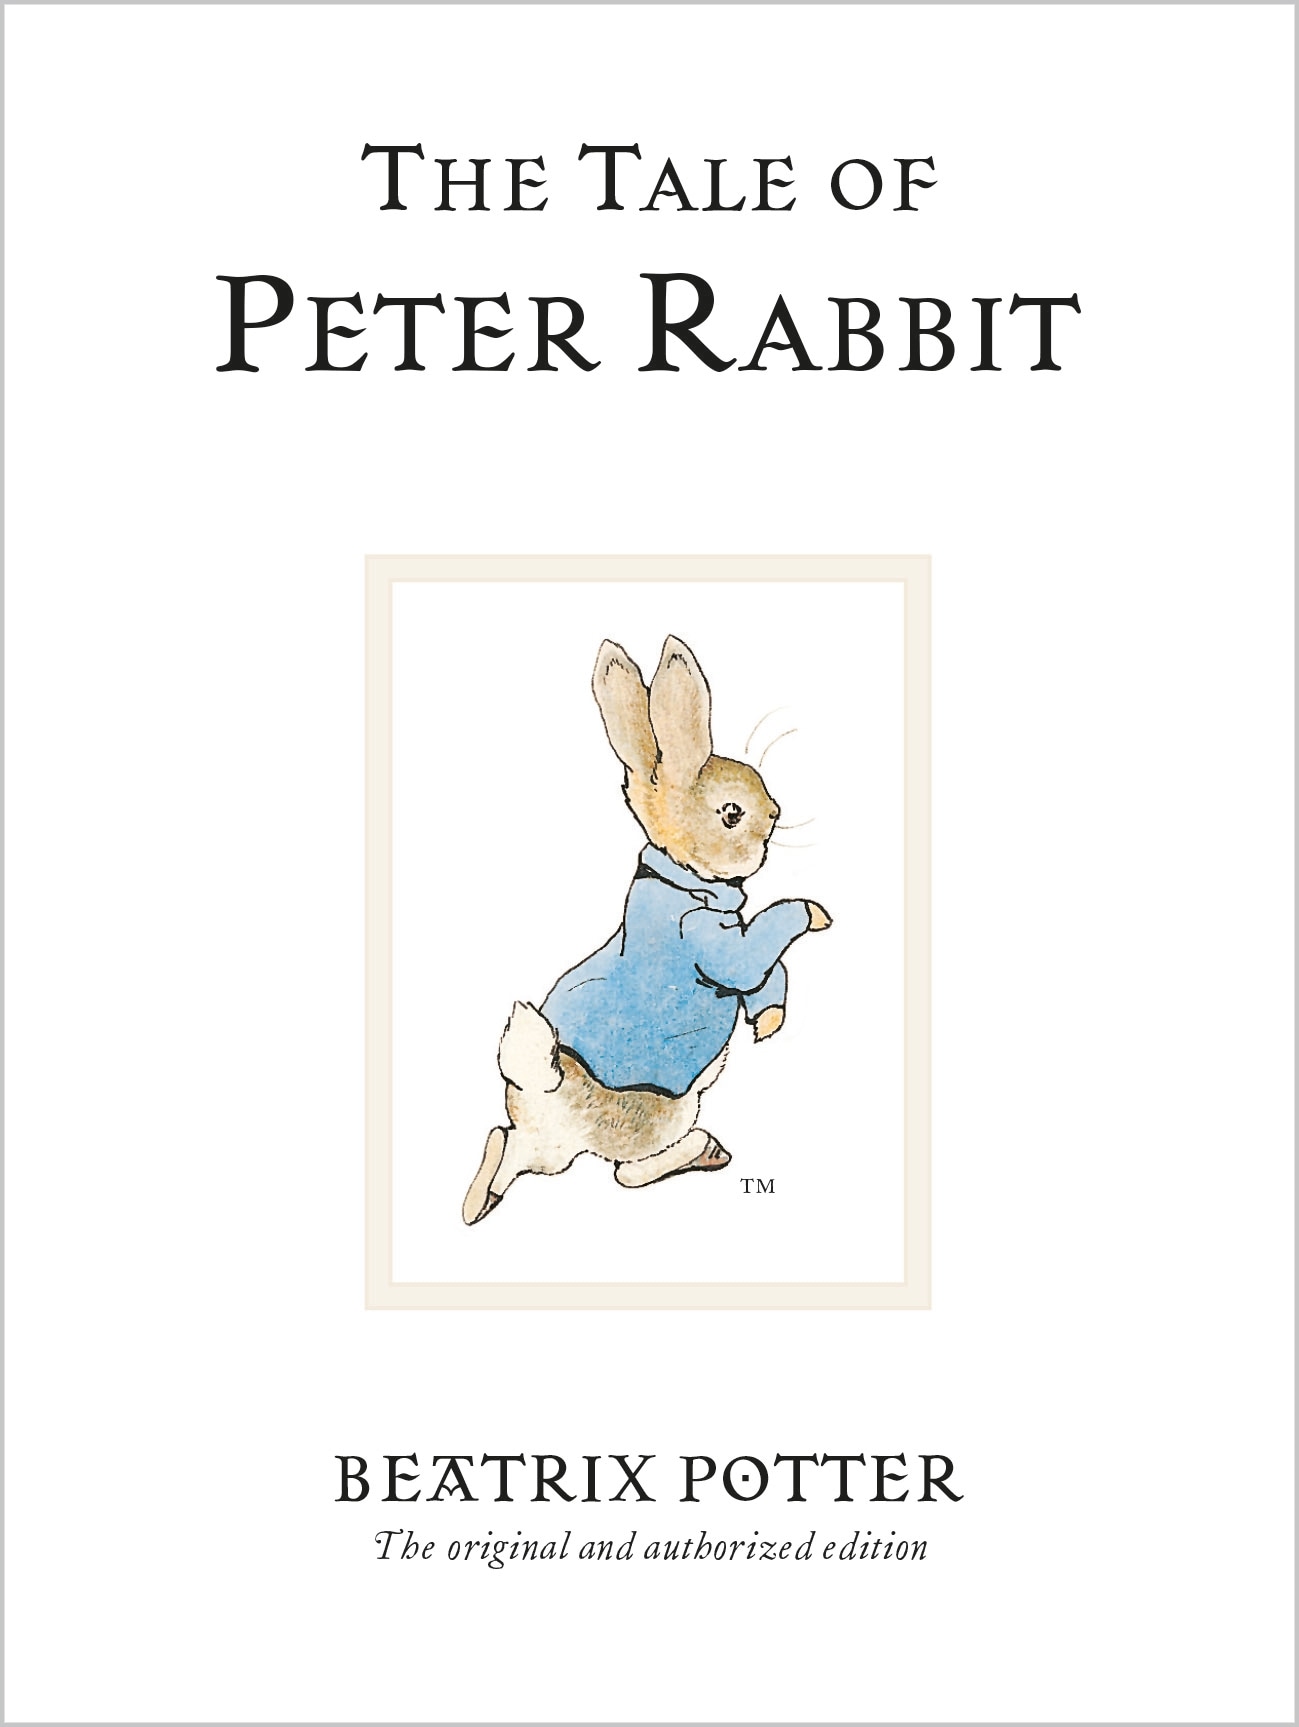 Book “The Tale Of Peter Rabbit” by Beatrix Potter — March 7, 2002